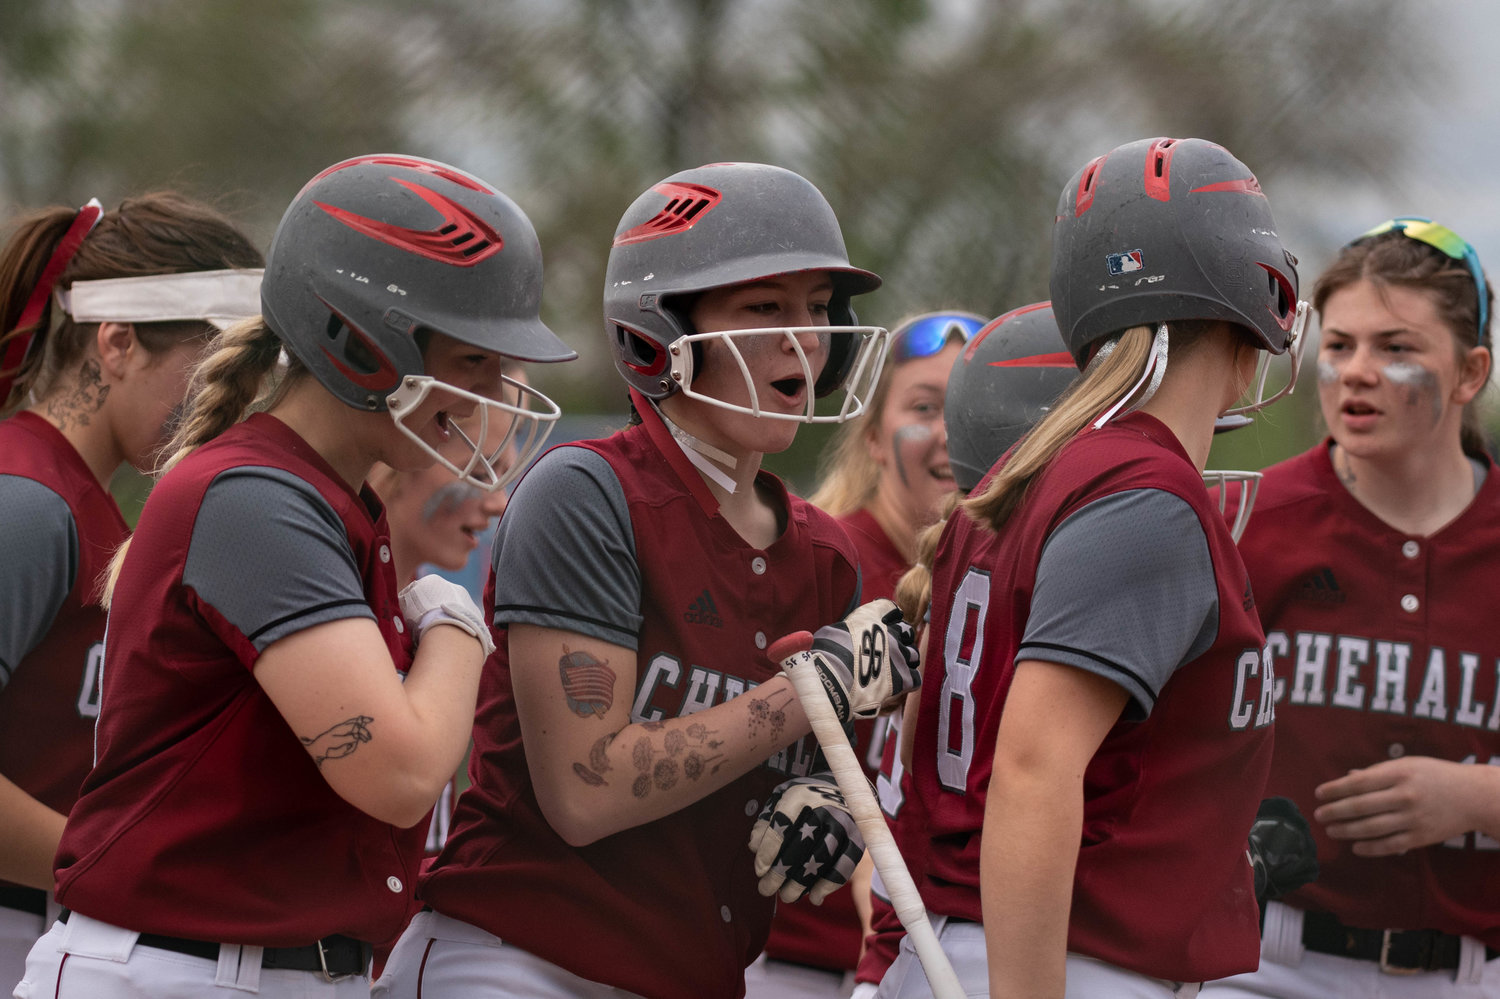 W.F. West celebrates after Saige Brindle's home run against Olympic in the 2A State Quarterfinals at Carlon Park in Selah May 27.